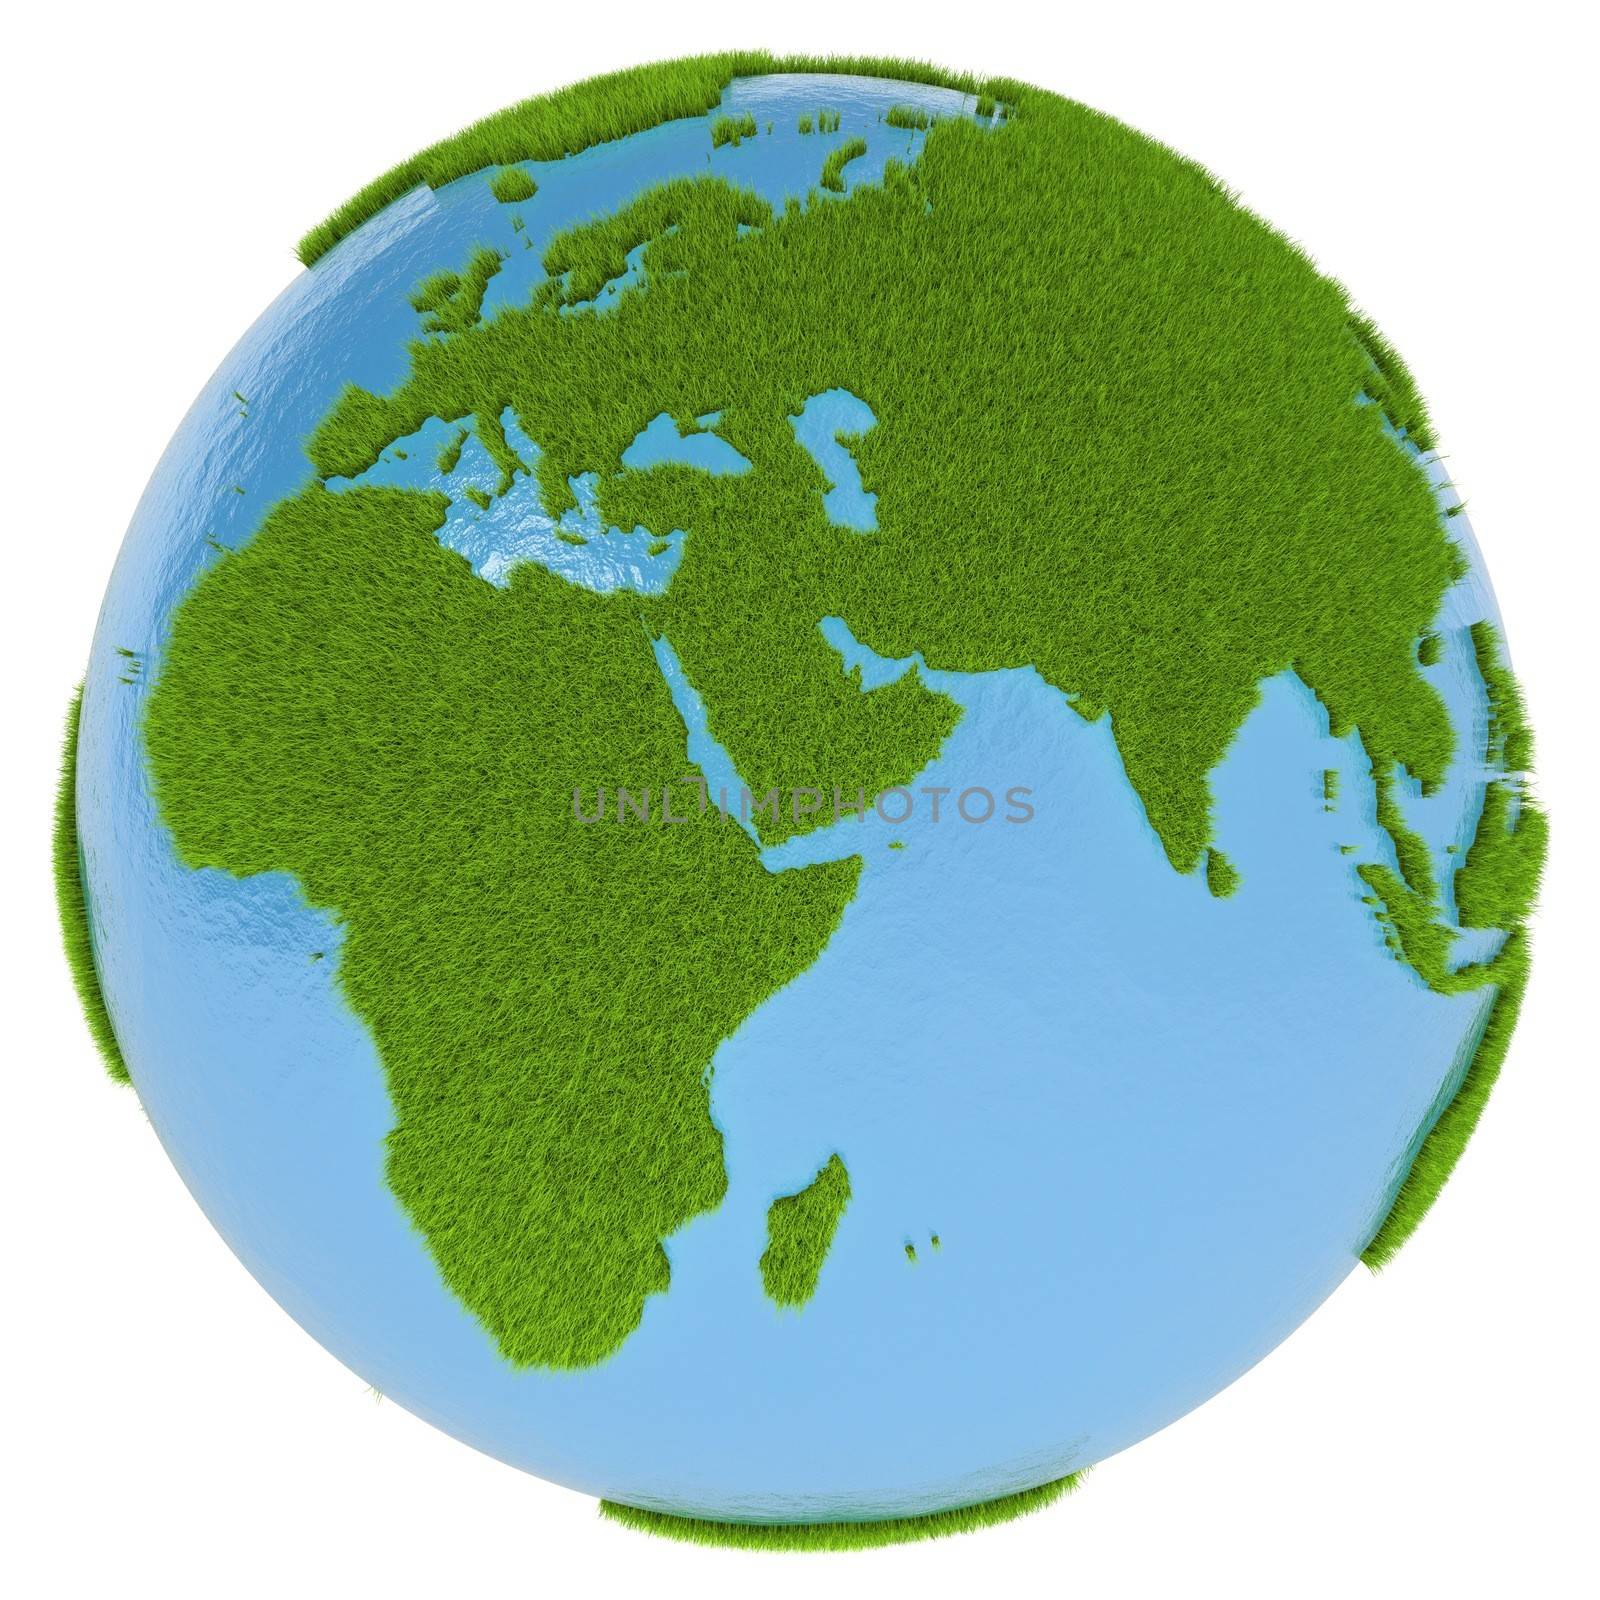 Green planet with blue oceans and continents covered with grass isolated on white background. Concept of ecology and clean environment